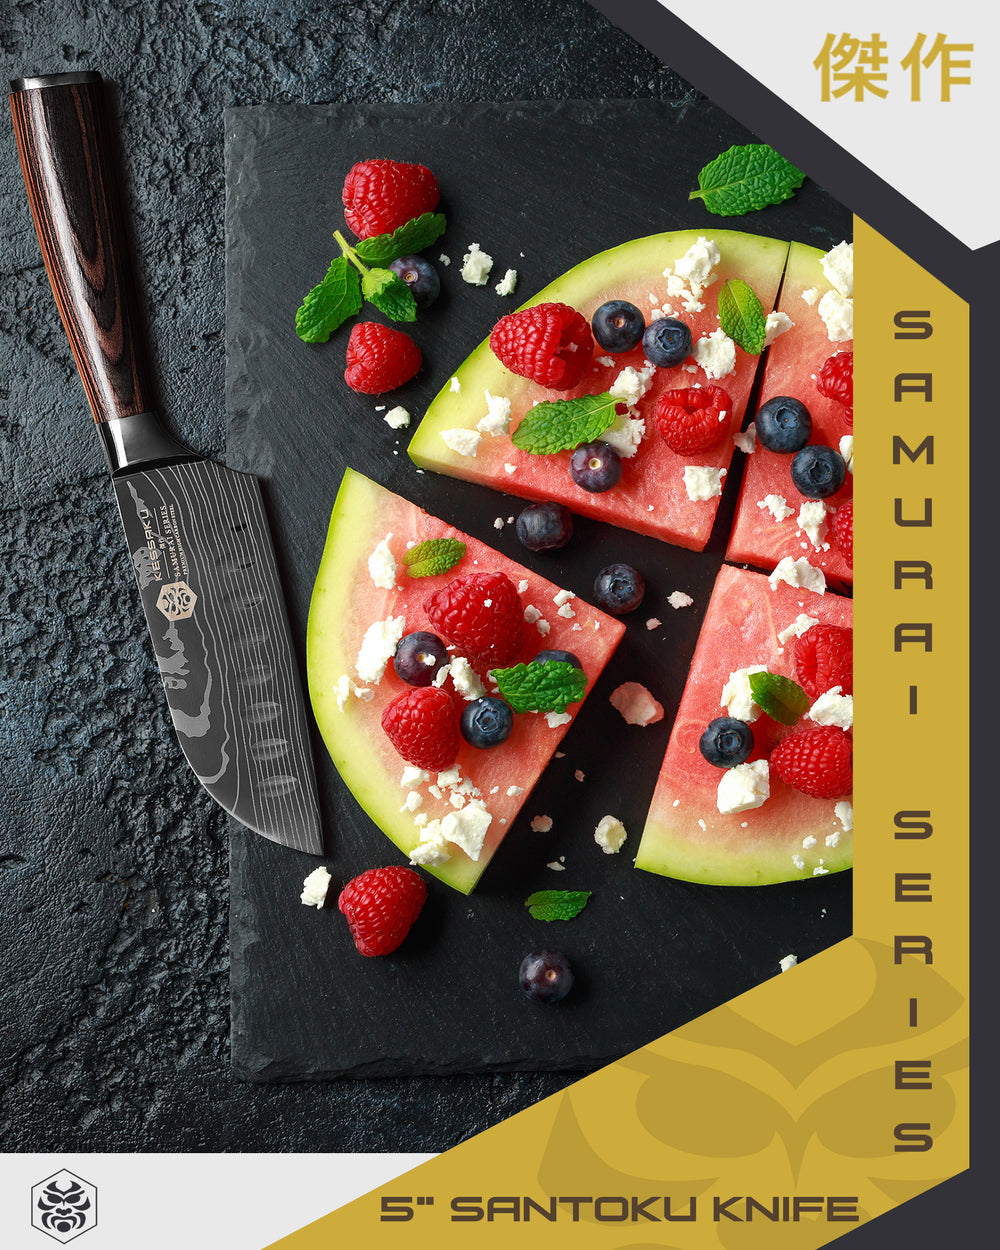 The Samurai Mini Santoku after slicing watermelon wedges with berries, feta, and mint